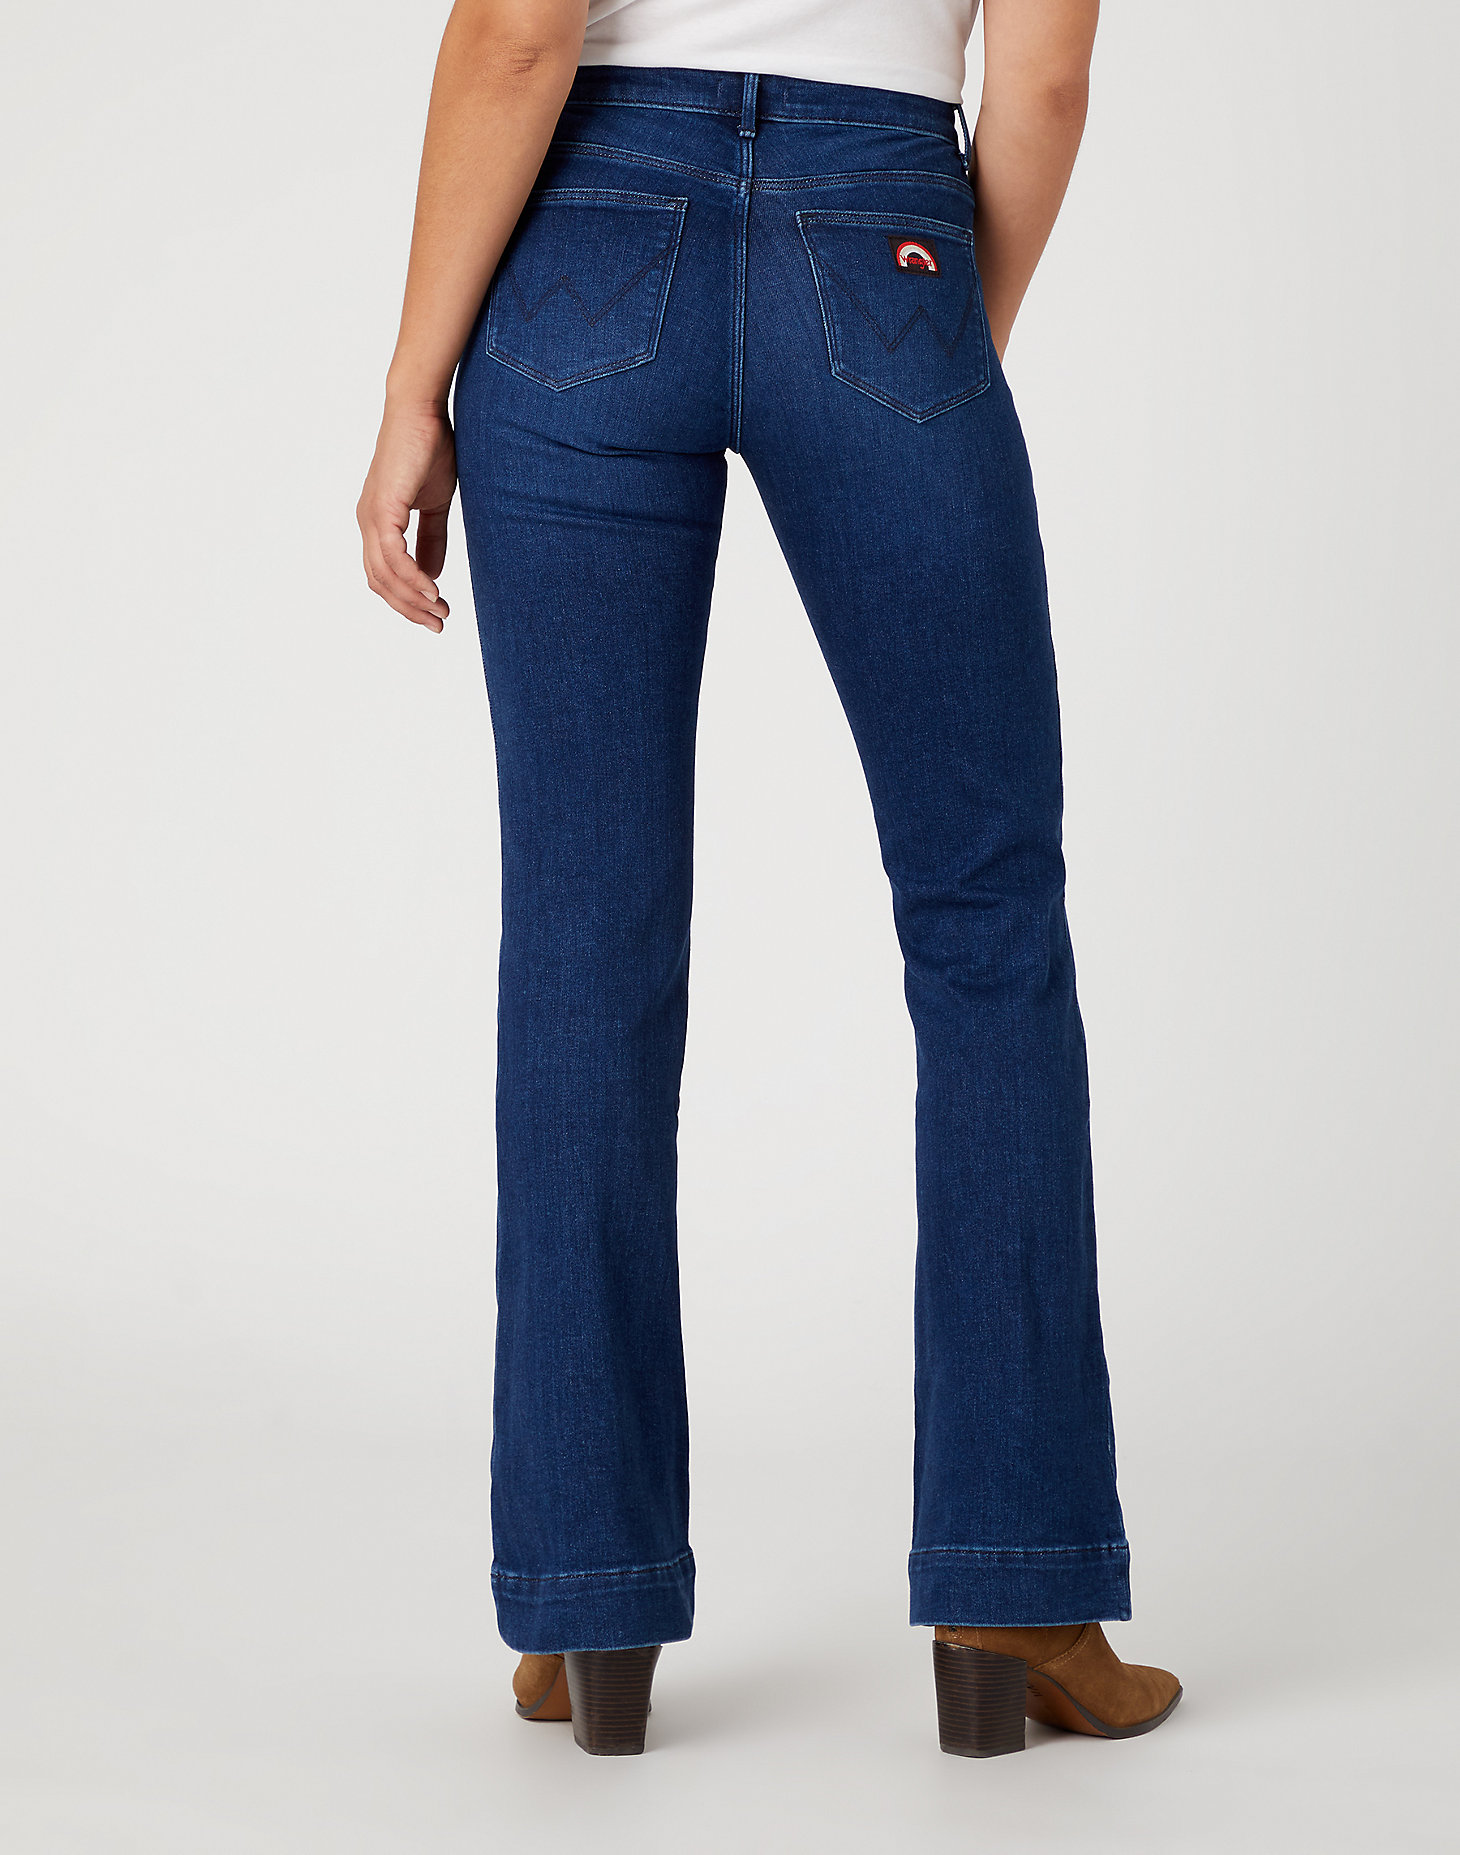 Flare Jeans in Blue Love alternative view 2